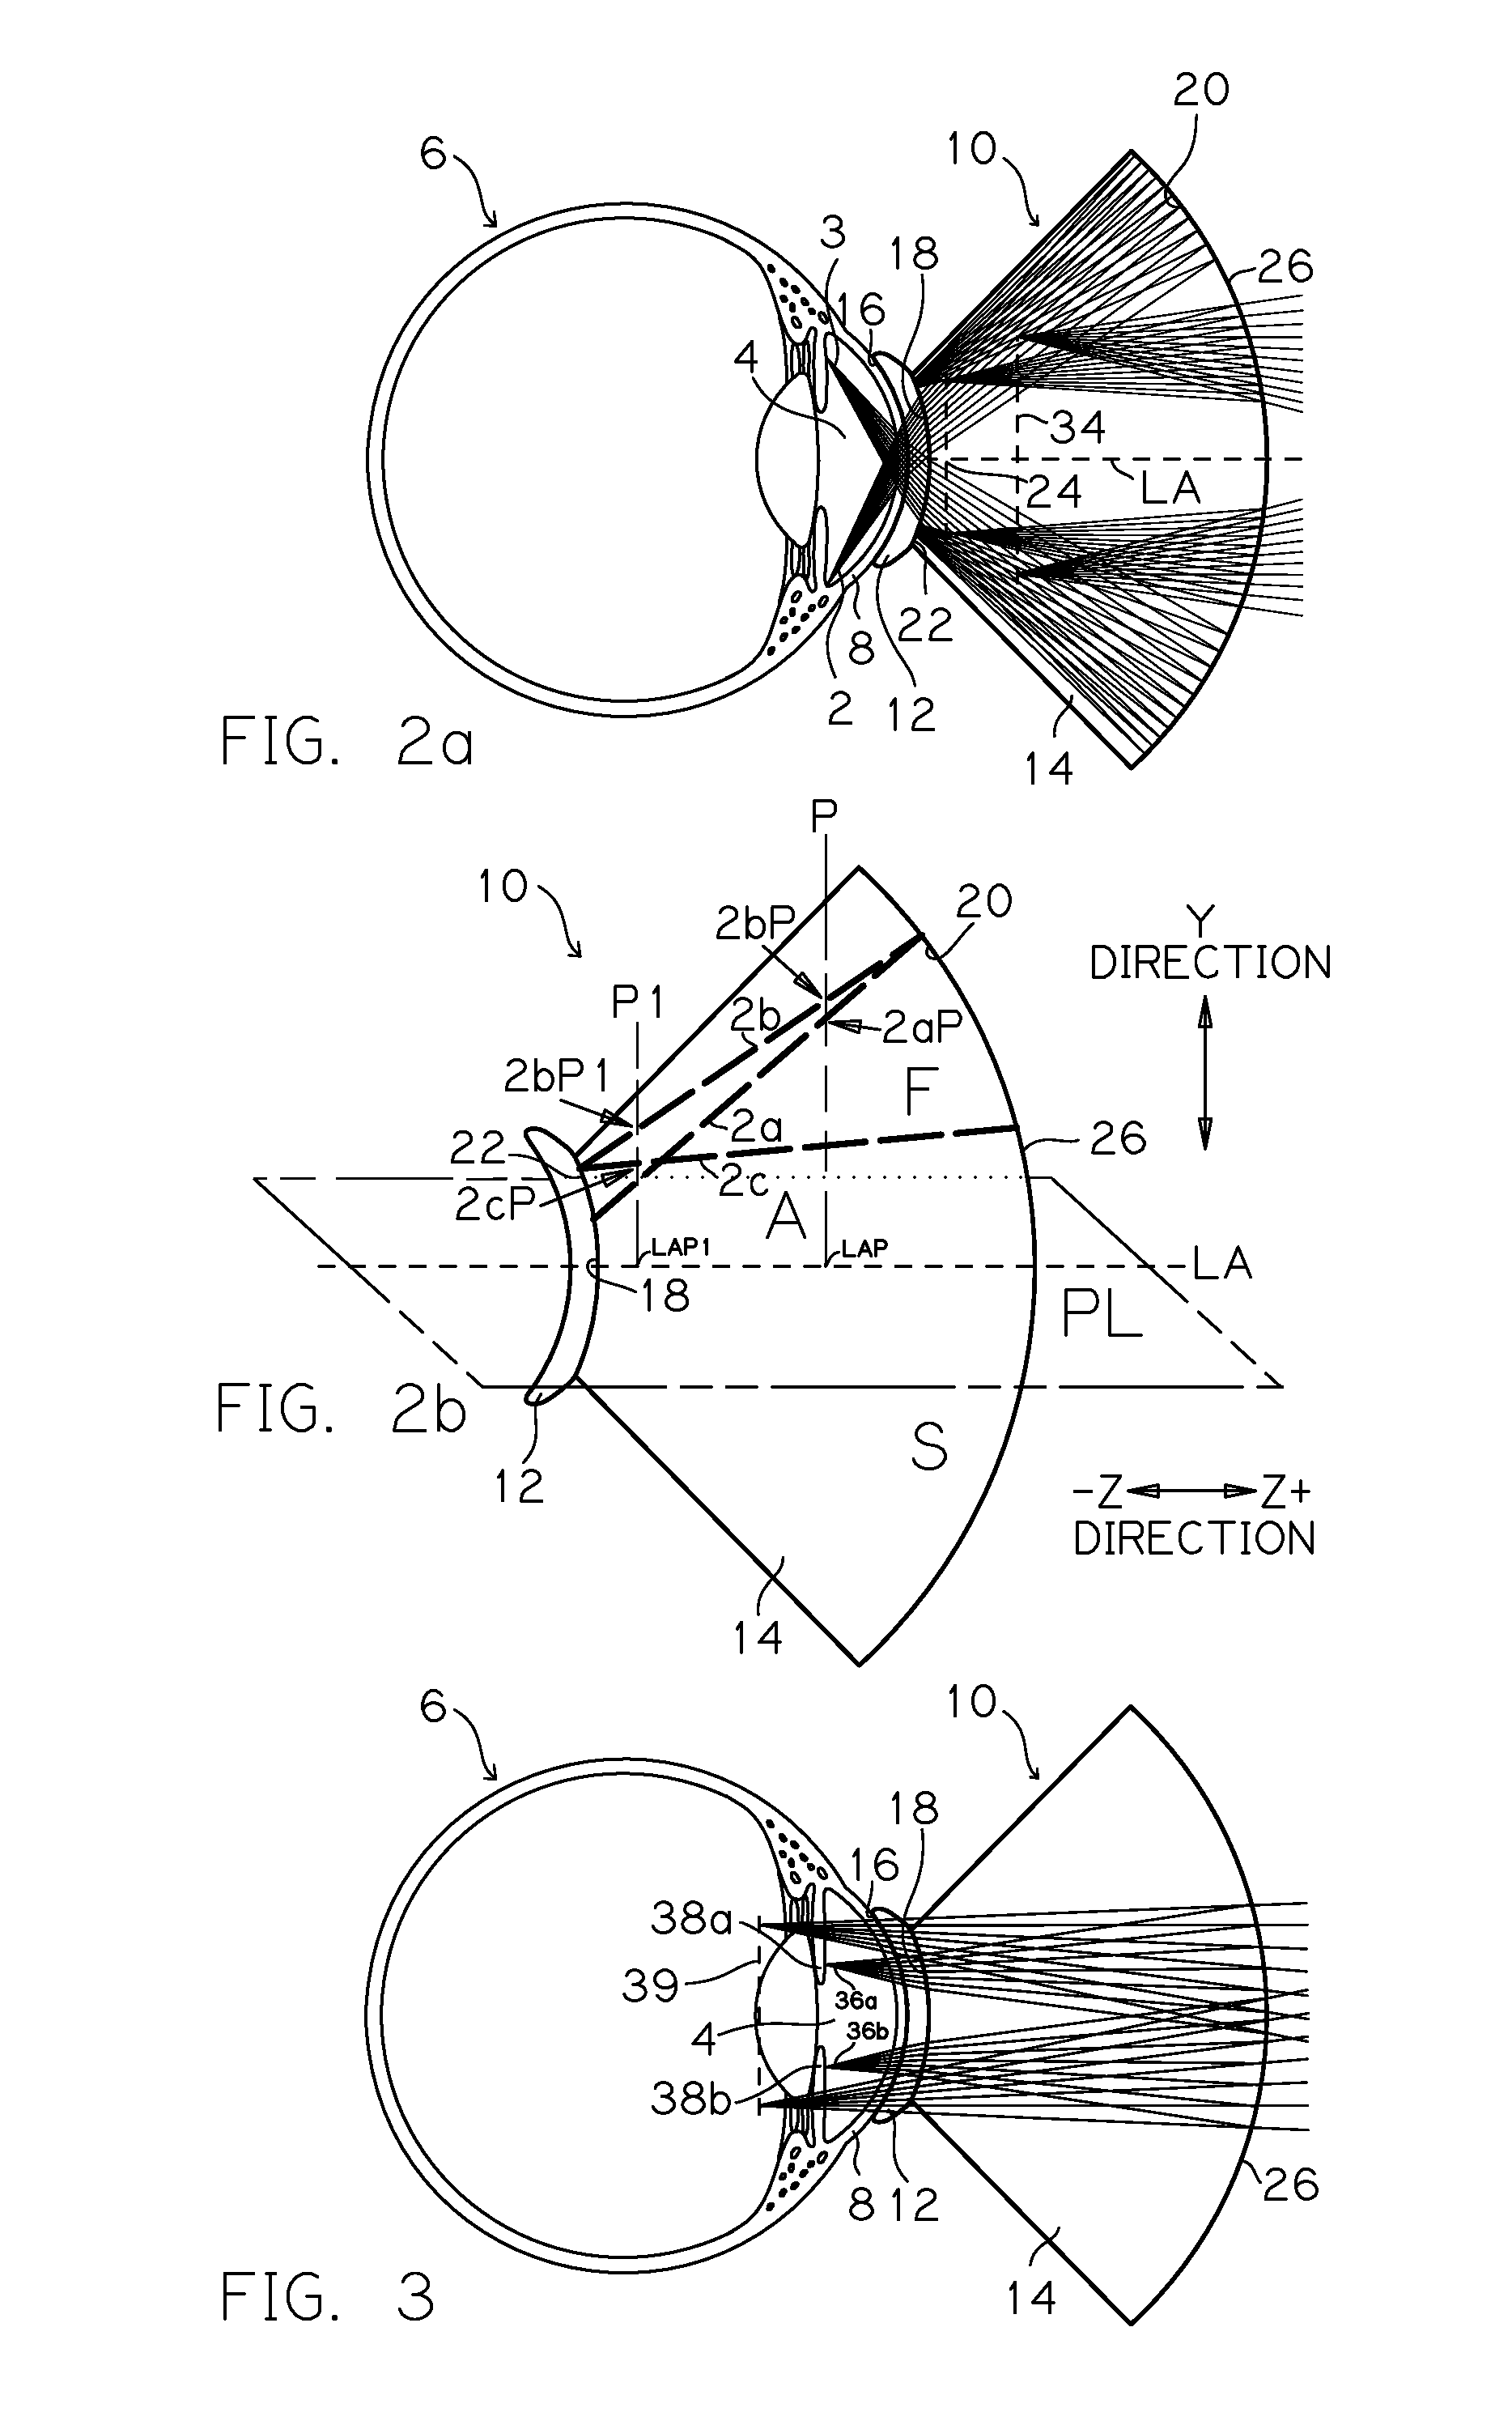 Real image forming eye examination lens utilizing two reflecting surfaces with non-mirrored central viewing area